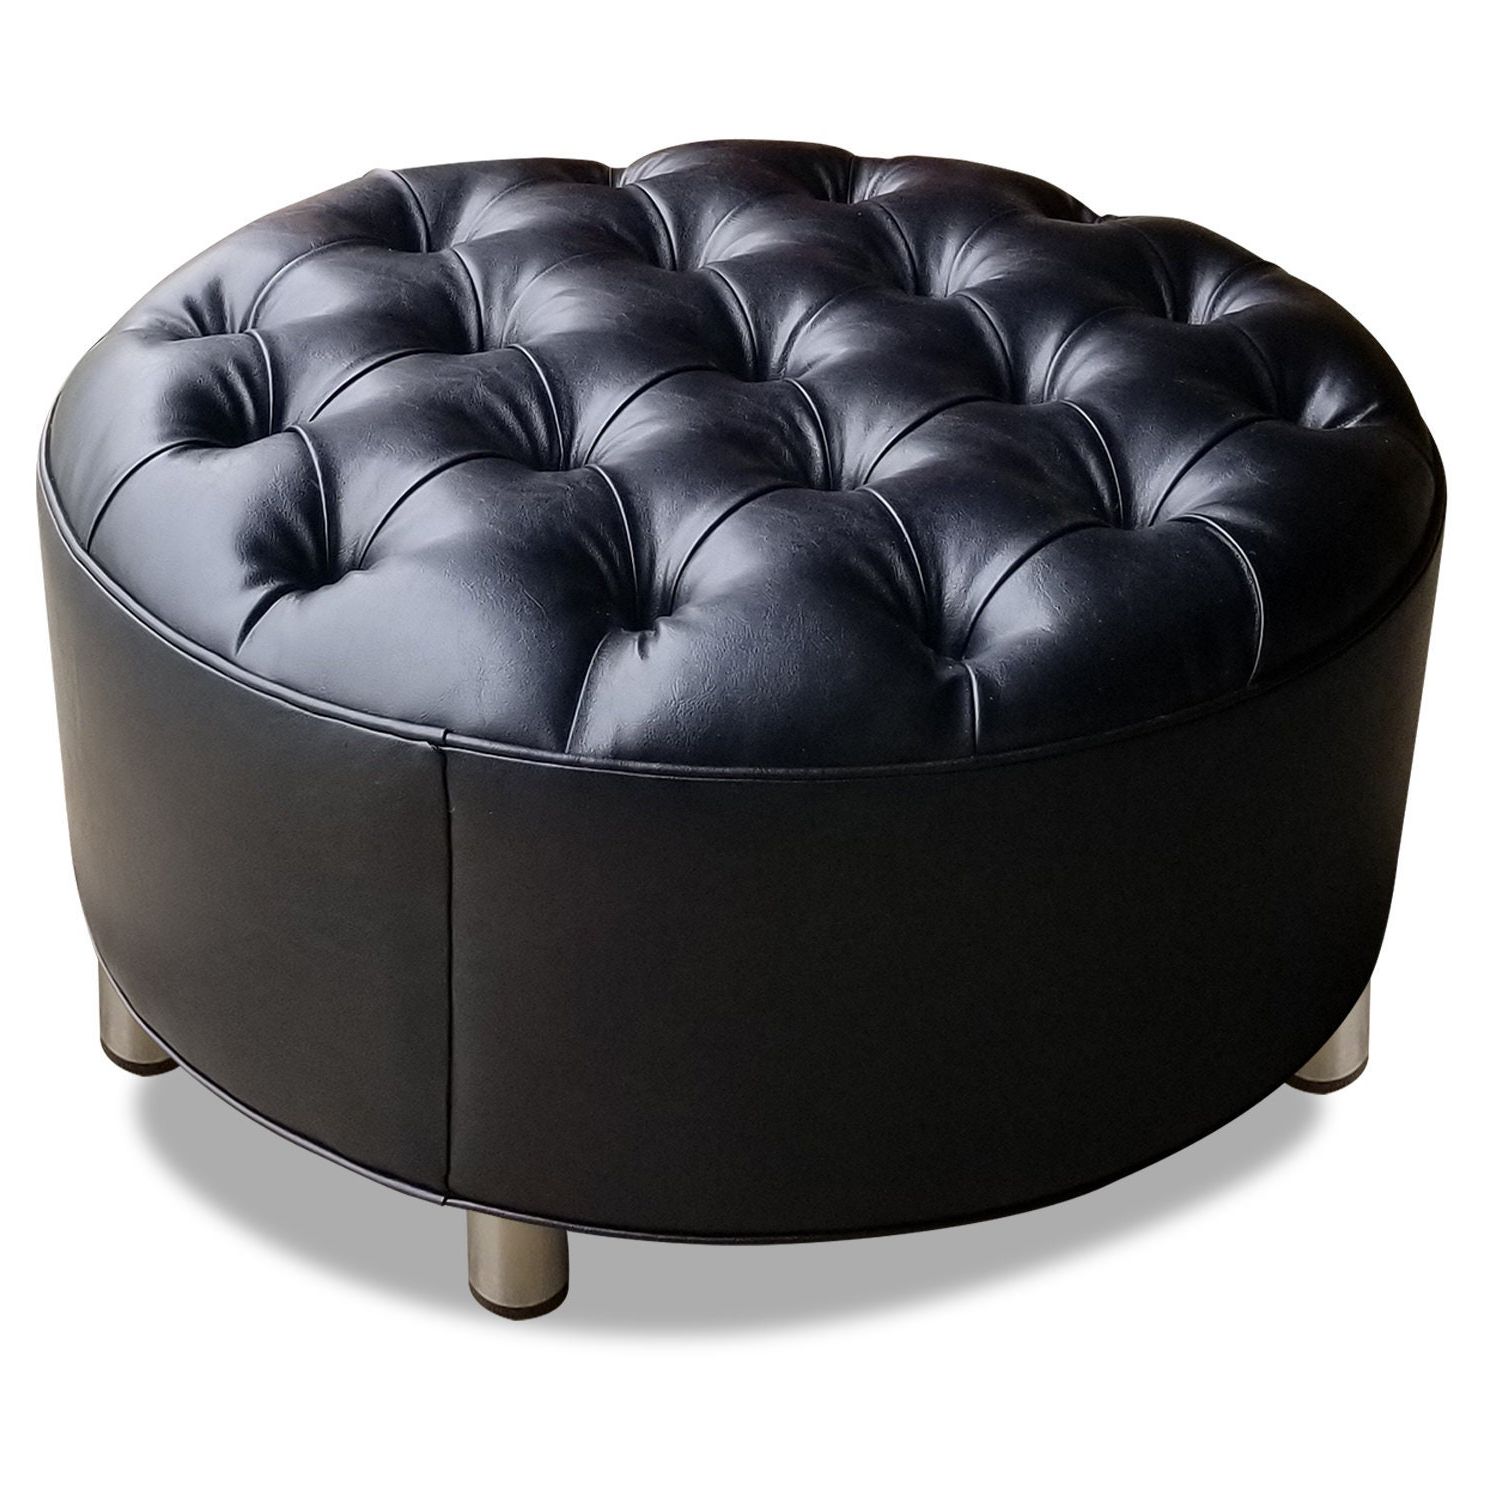 Weathered Ivory Leather Hide Pouf Ottomans Within 2018 Modern Round Ottoman, Tufted, Black Vegan Leather, Chrome Metal Legs (View 9 of 10)